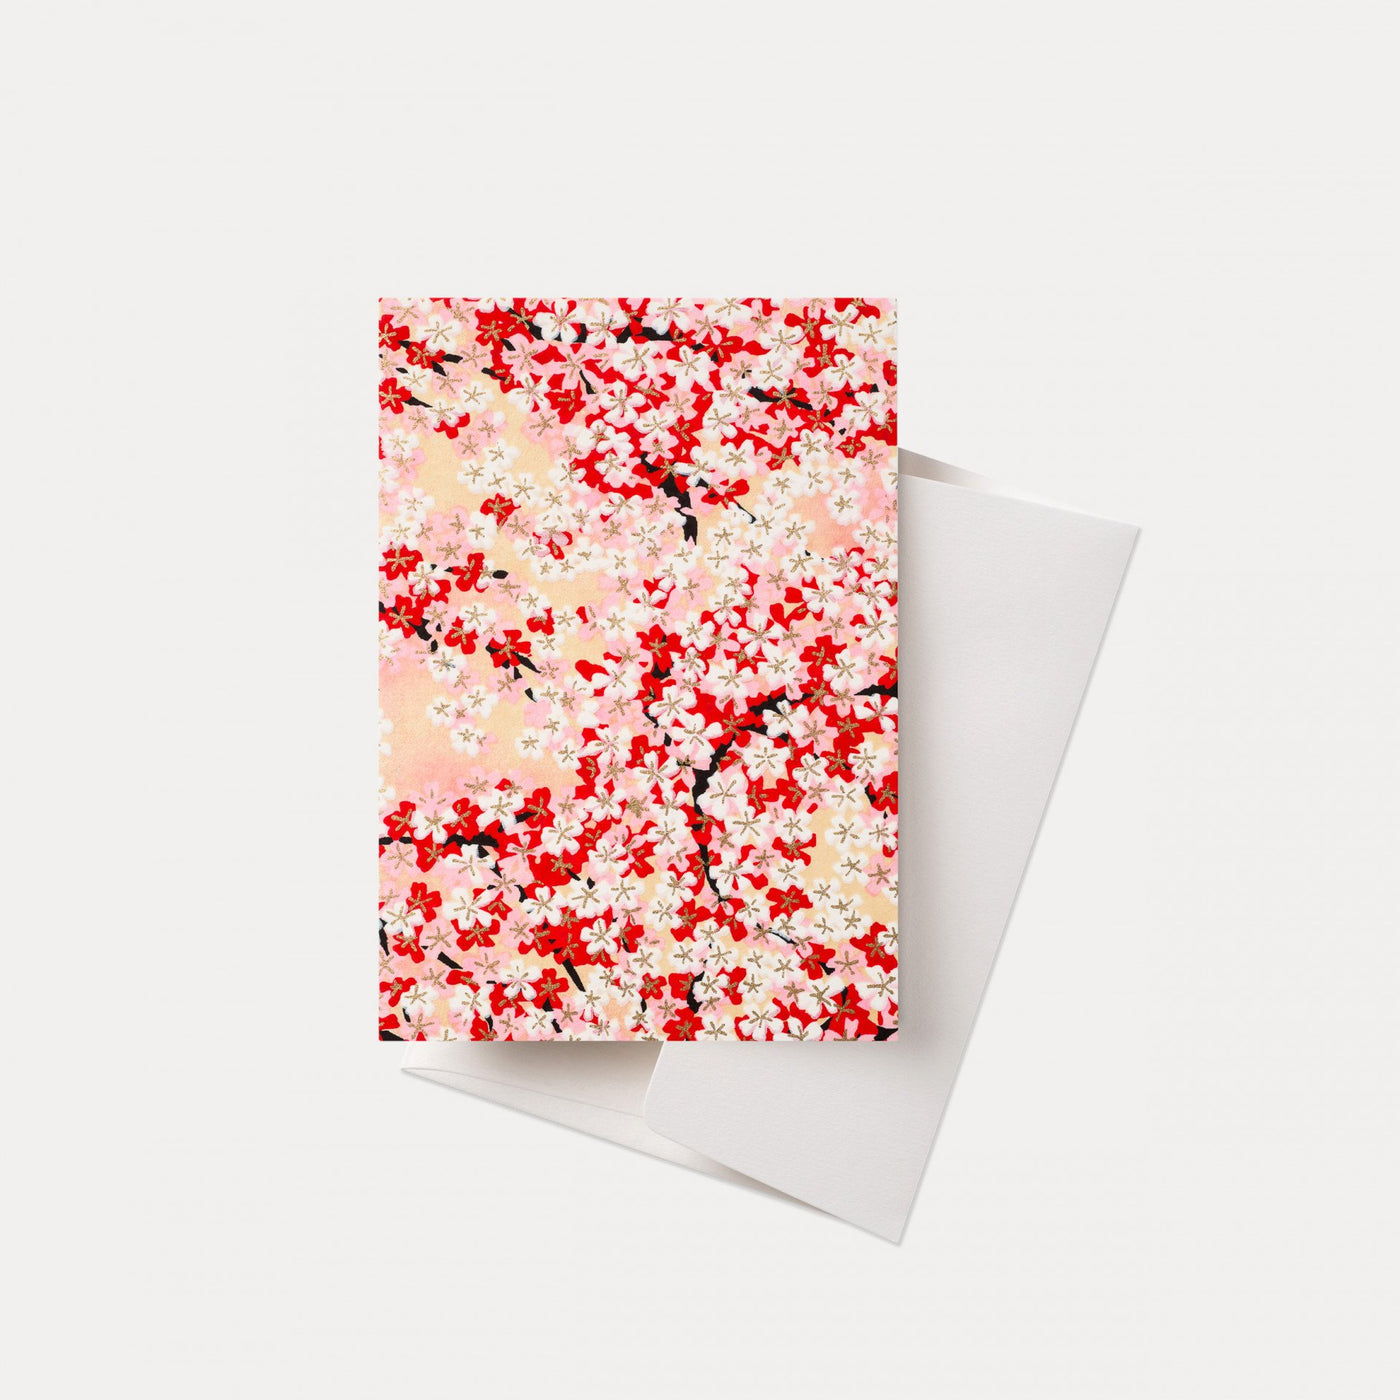 Esmie Greeting Card - White Red Blossom / Pink